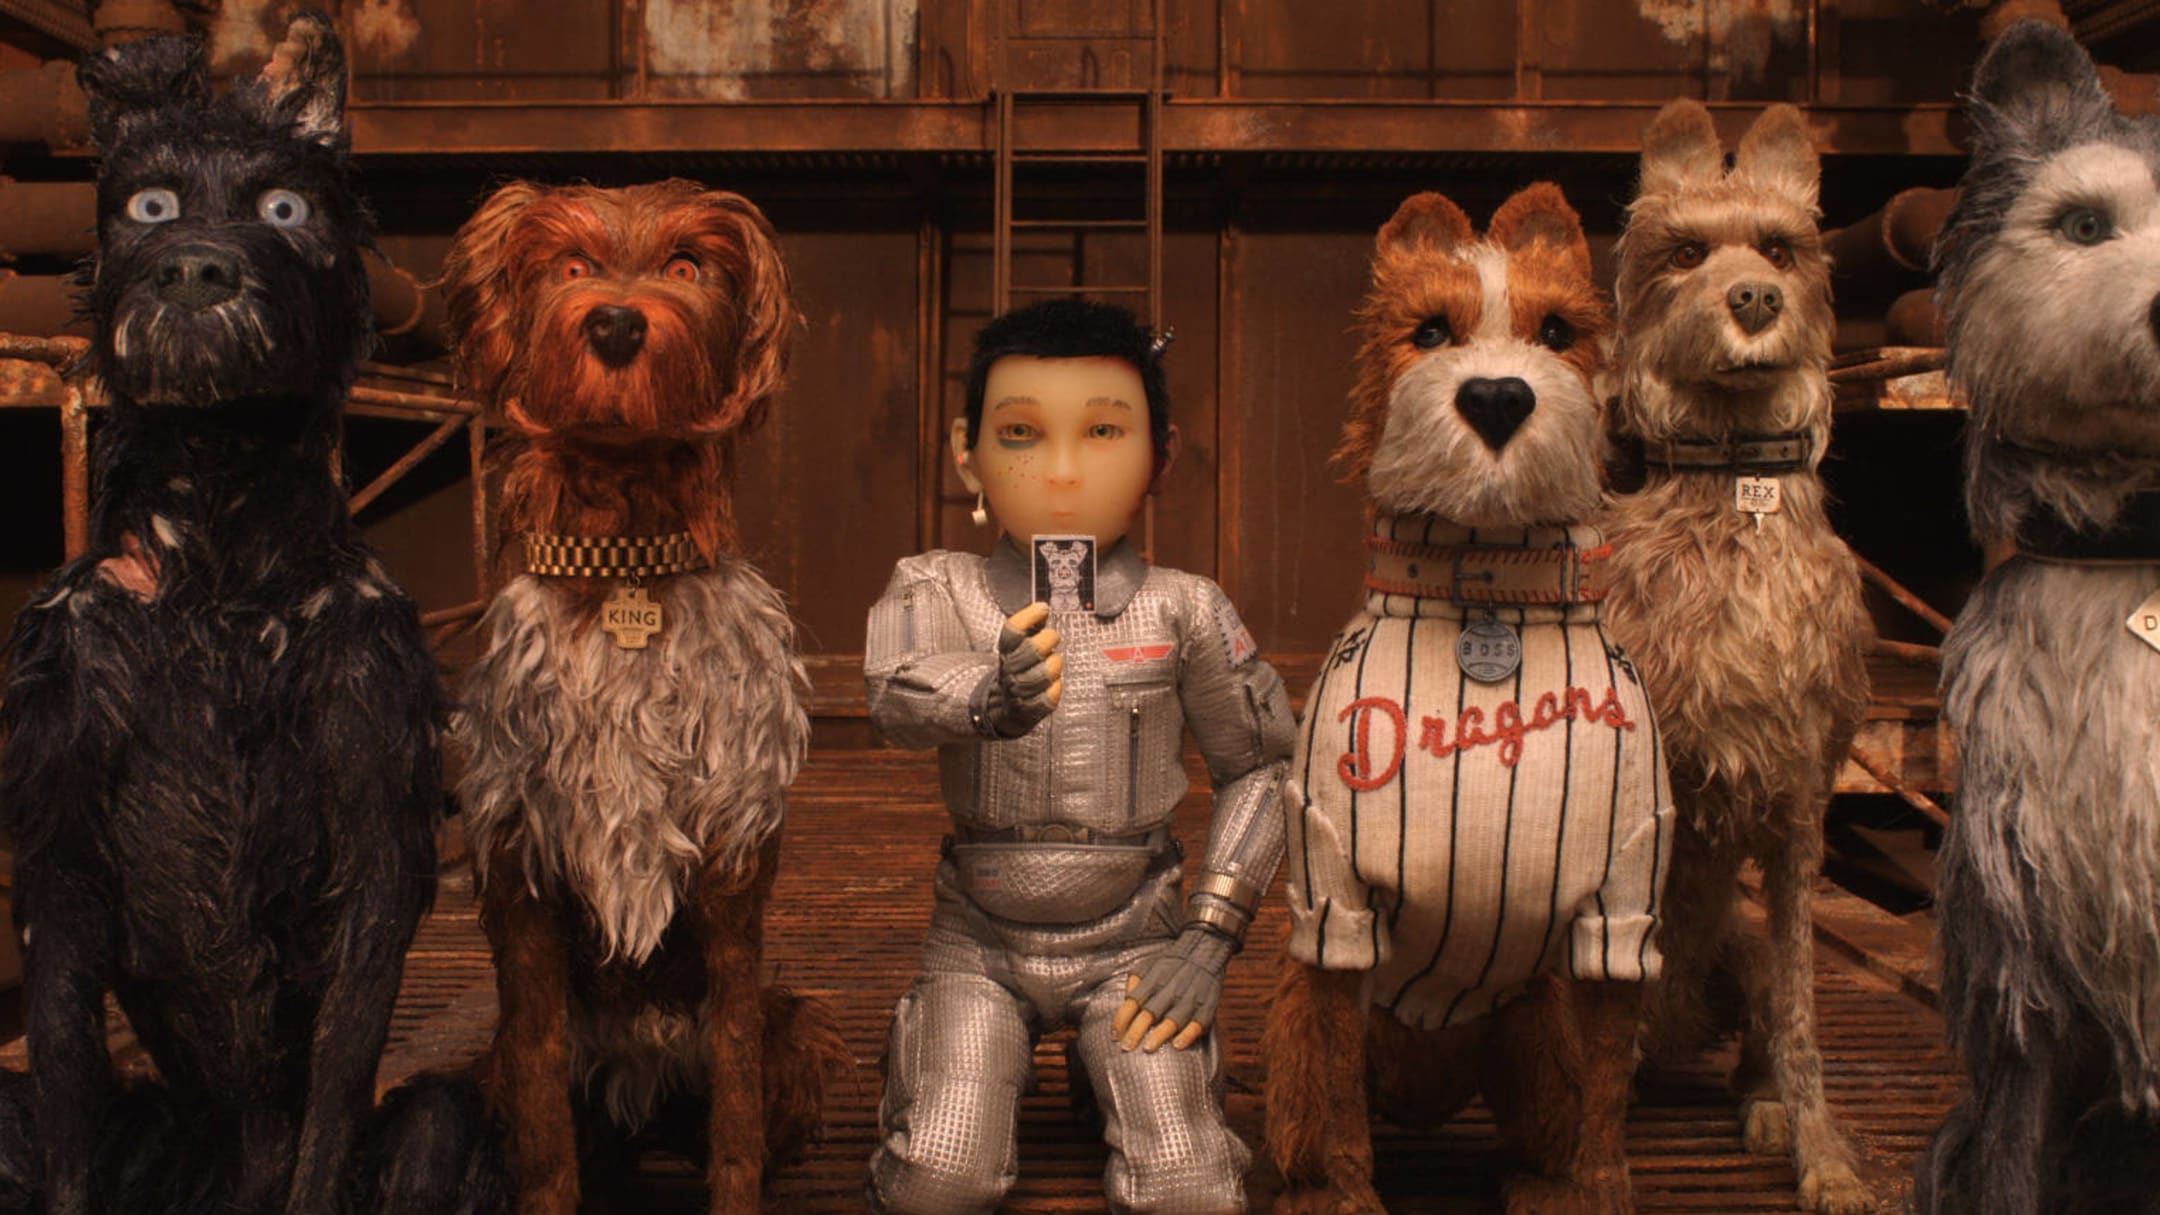 Everyone is recreating Wes Anderson's world. Wes Anderson isn't